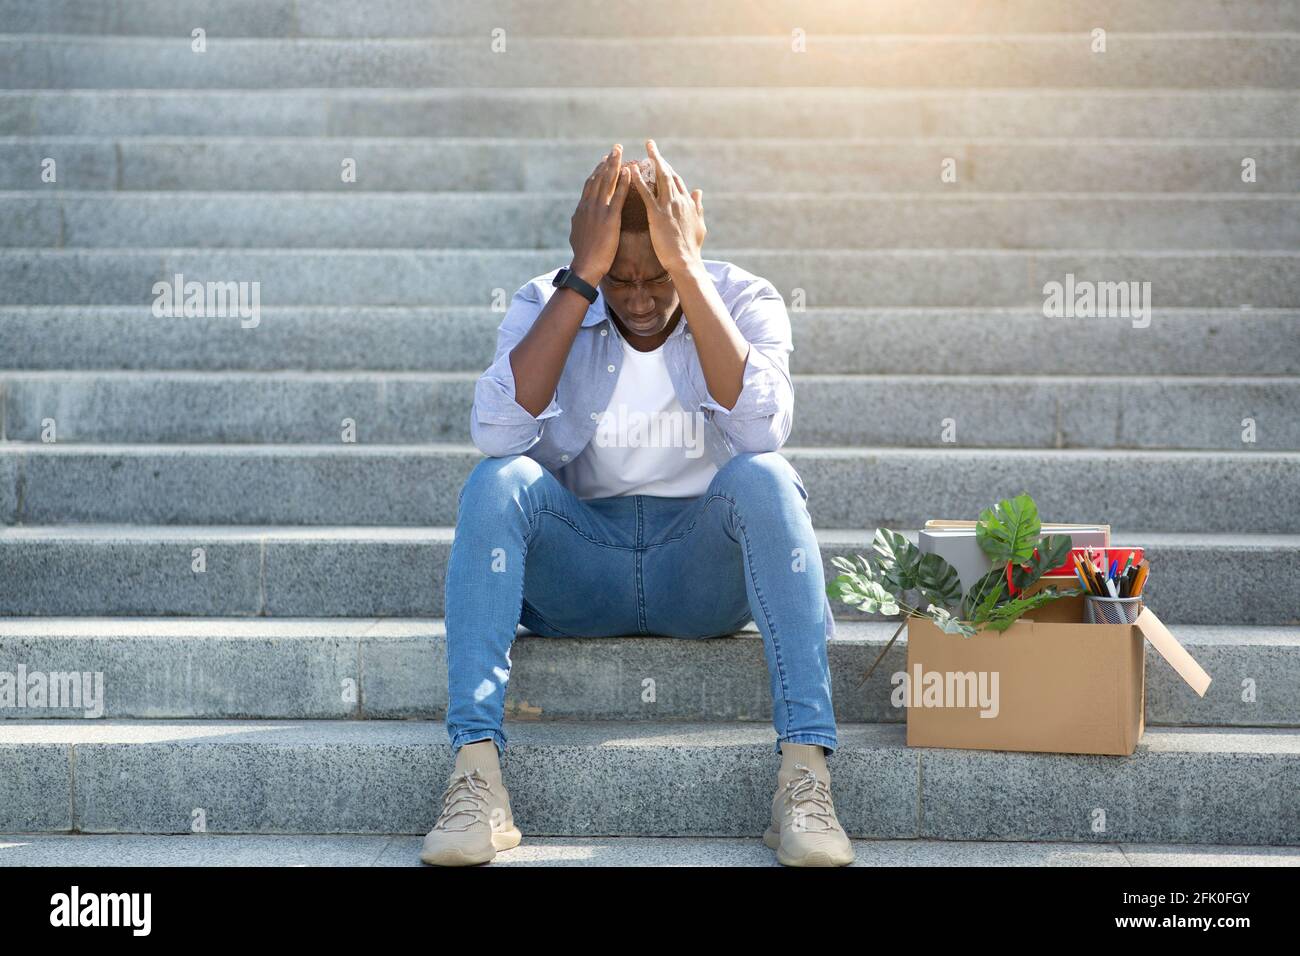 Economic crisis and bankruptcy. Desperate black man with personal belongings sitting on stairs after losing work, outside Stock Photo